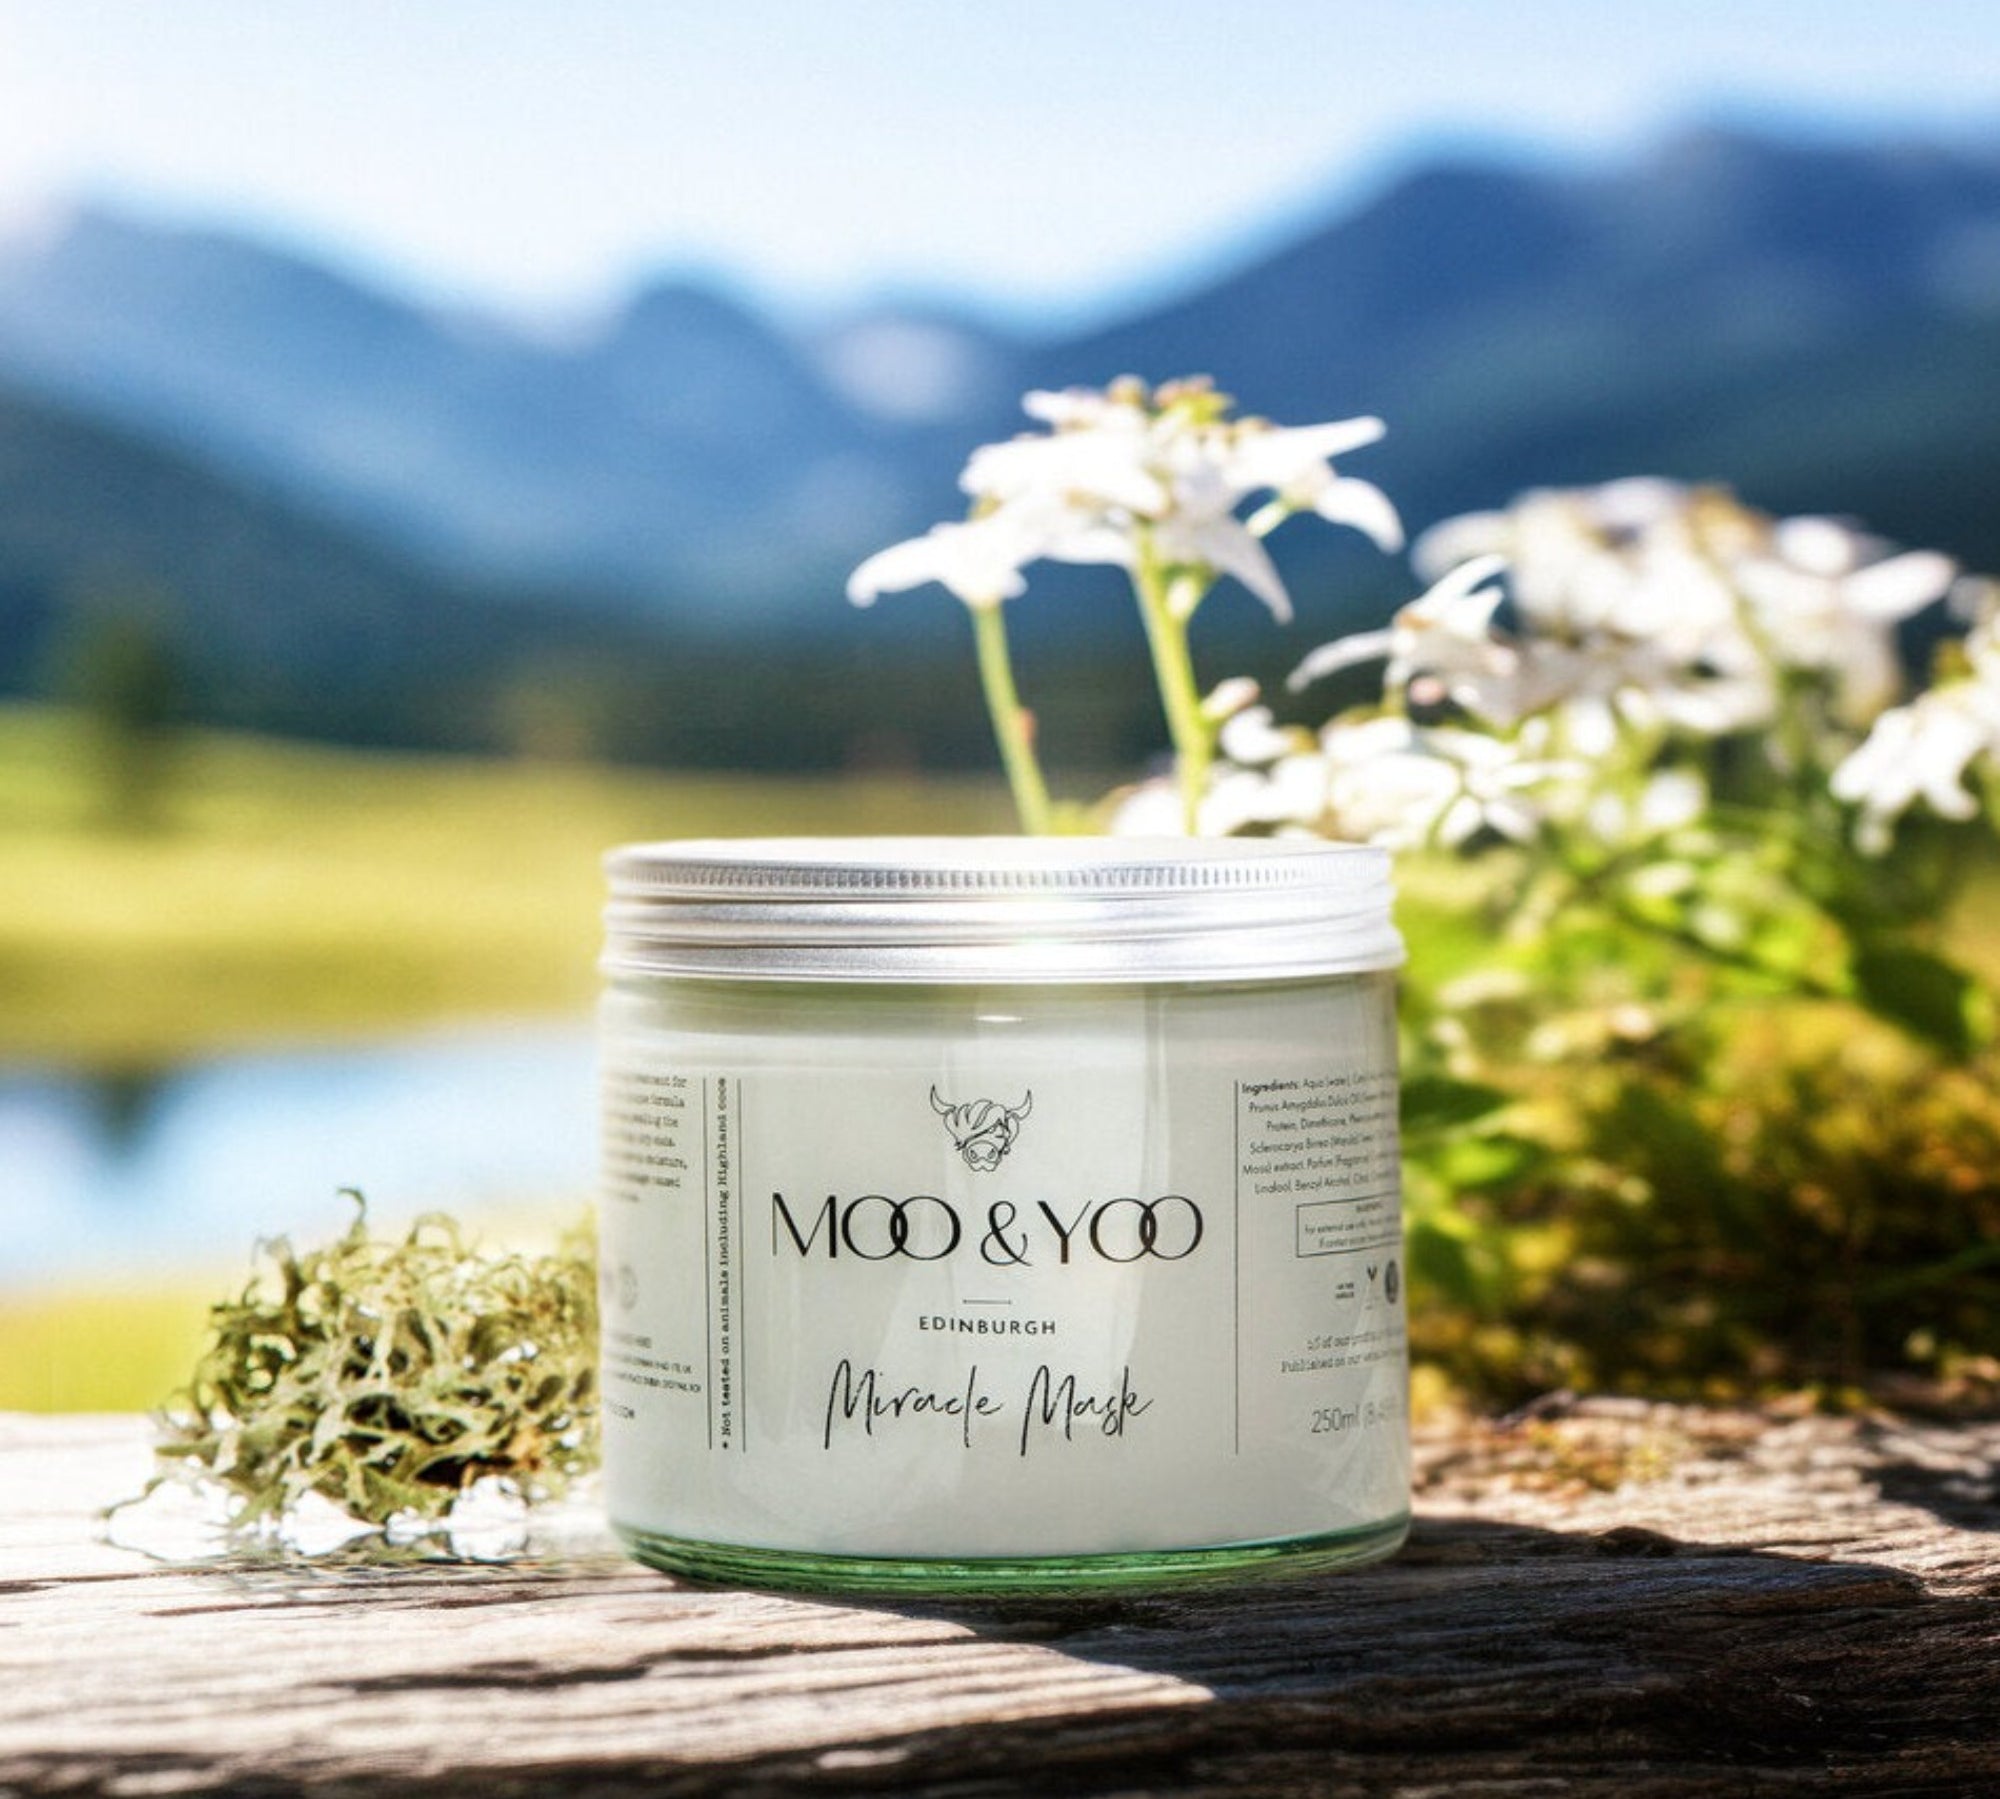 A glass jar of Moo and Yoo Miracle Mask with an aluminium lid. It is placed on a rustic wooden bench overlooking a Scottish Loch and hills.  It is a spring day and there are white spring flowers behind it.